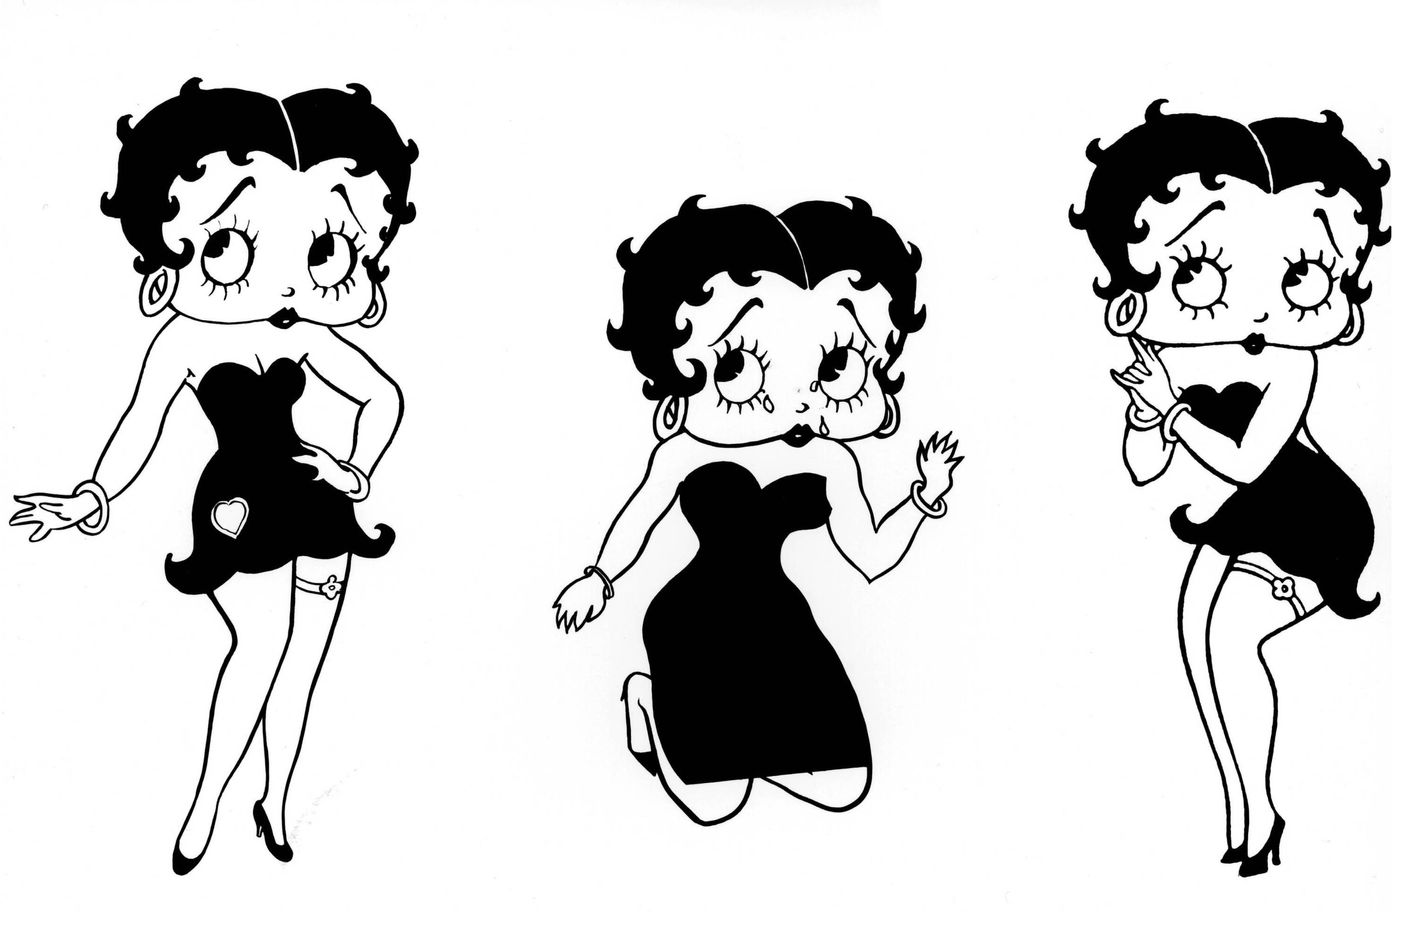 The Forgotten Black Woman Behind Betty Boop